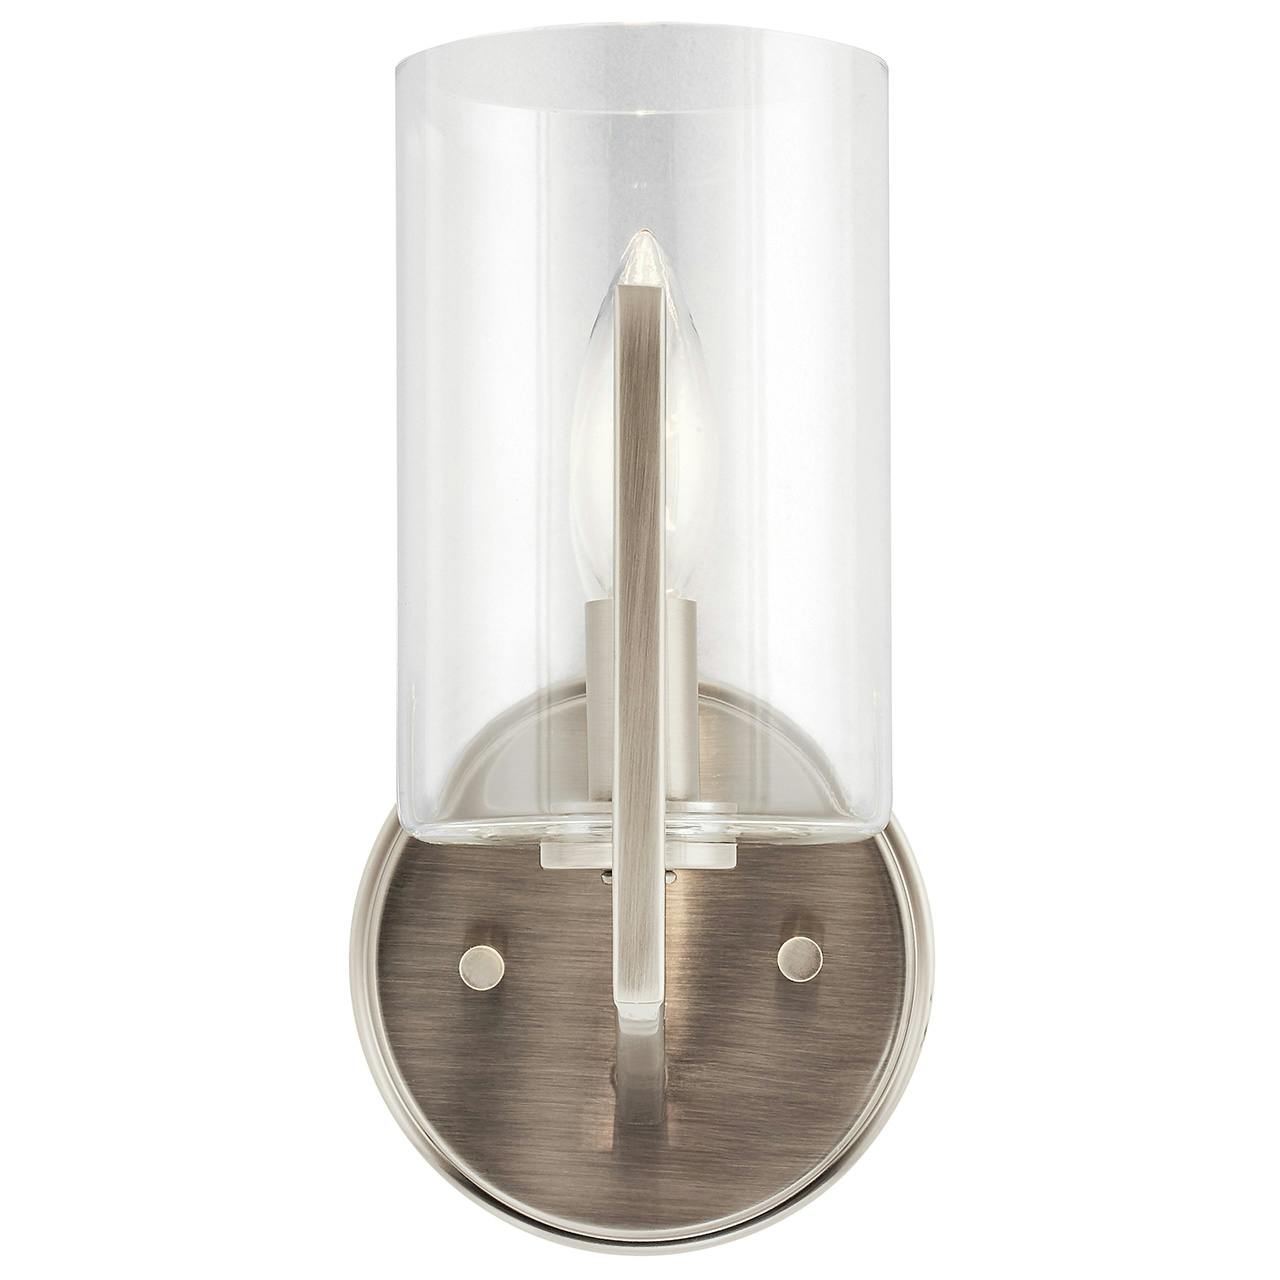 The Nye 9.75" 1 Light Sconce Pewter facing up on a white background